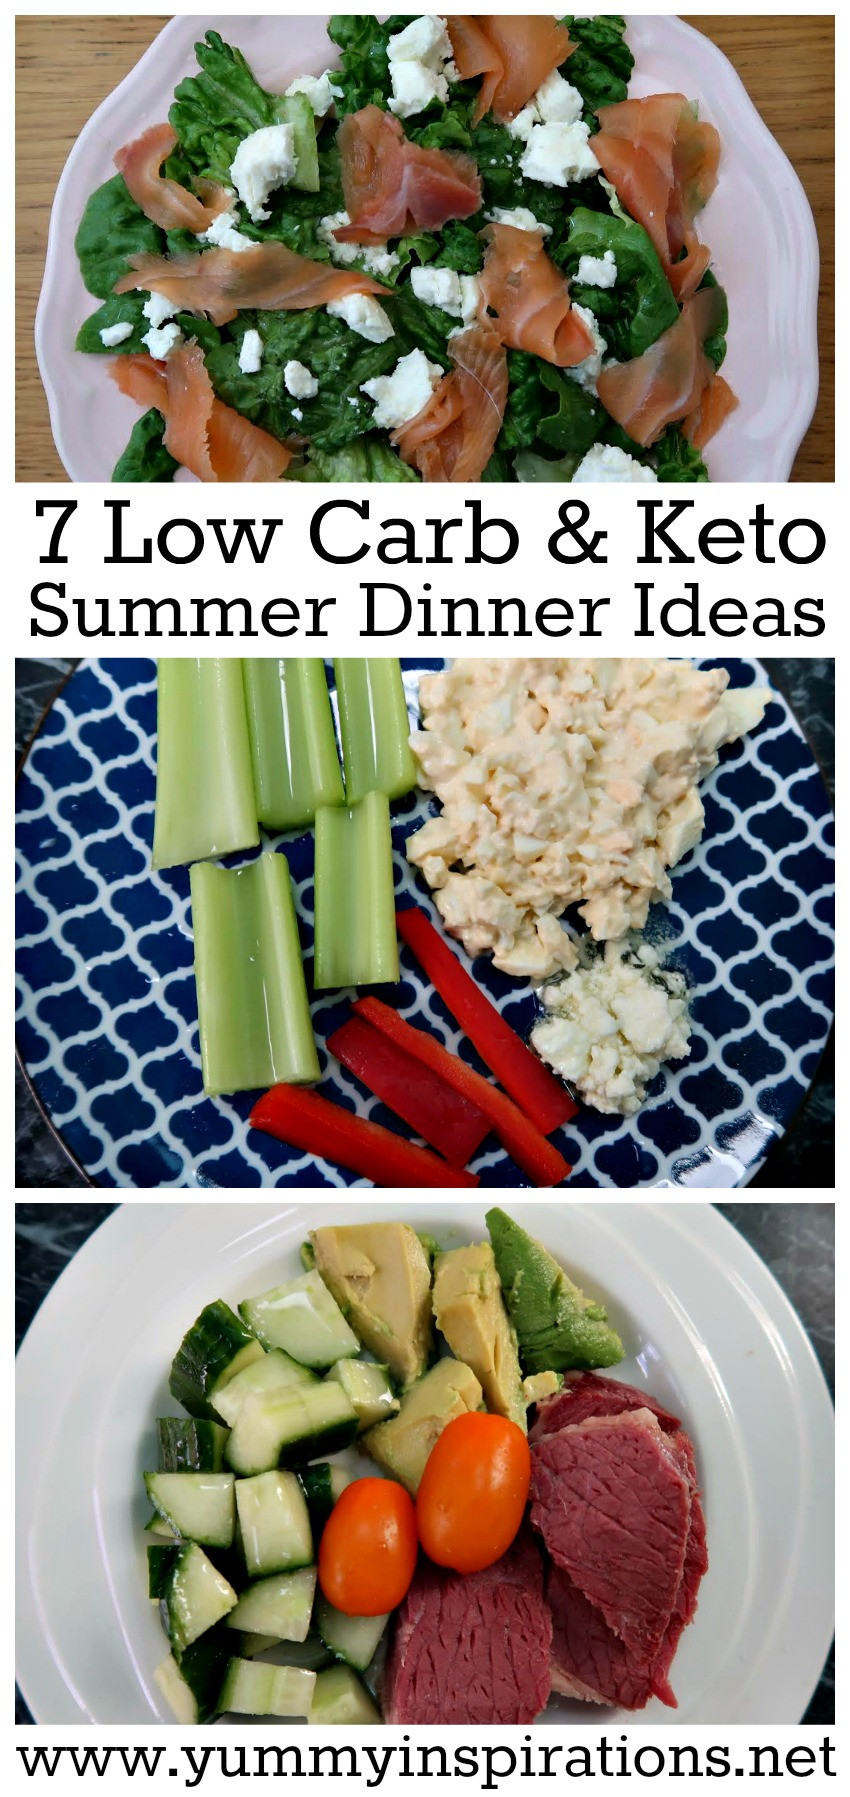 Low Carb Summer Dinners the Best Ideas for 7 Keto Diet Low Carb Summer Dinner Recipes &amp; Ideas